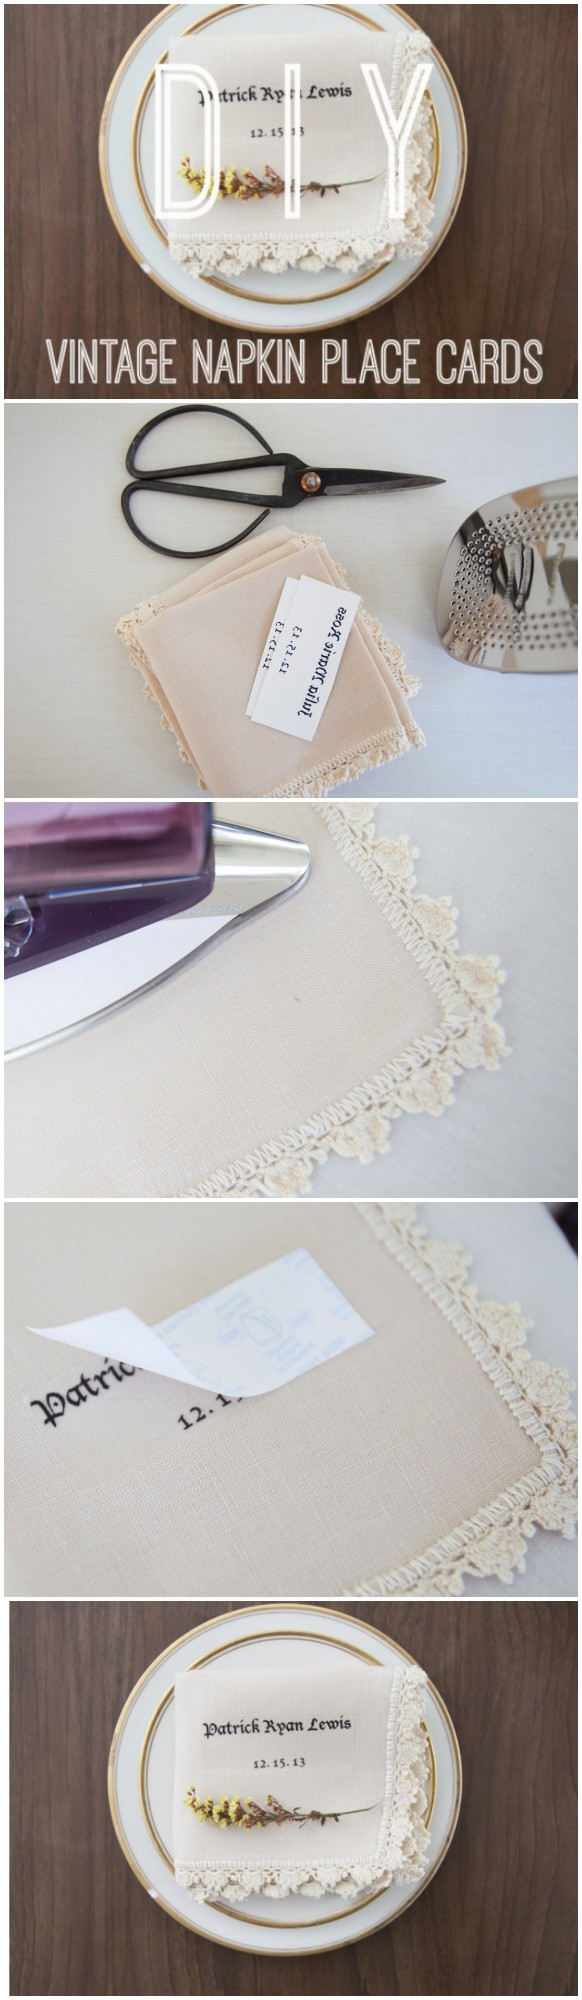 DIY Wedding Place Card Holder
 How to Make Personalized Vintage Napkins Rustic Wedding Chic